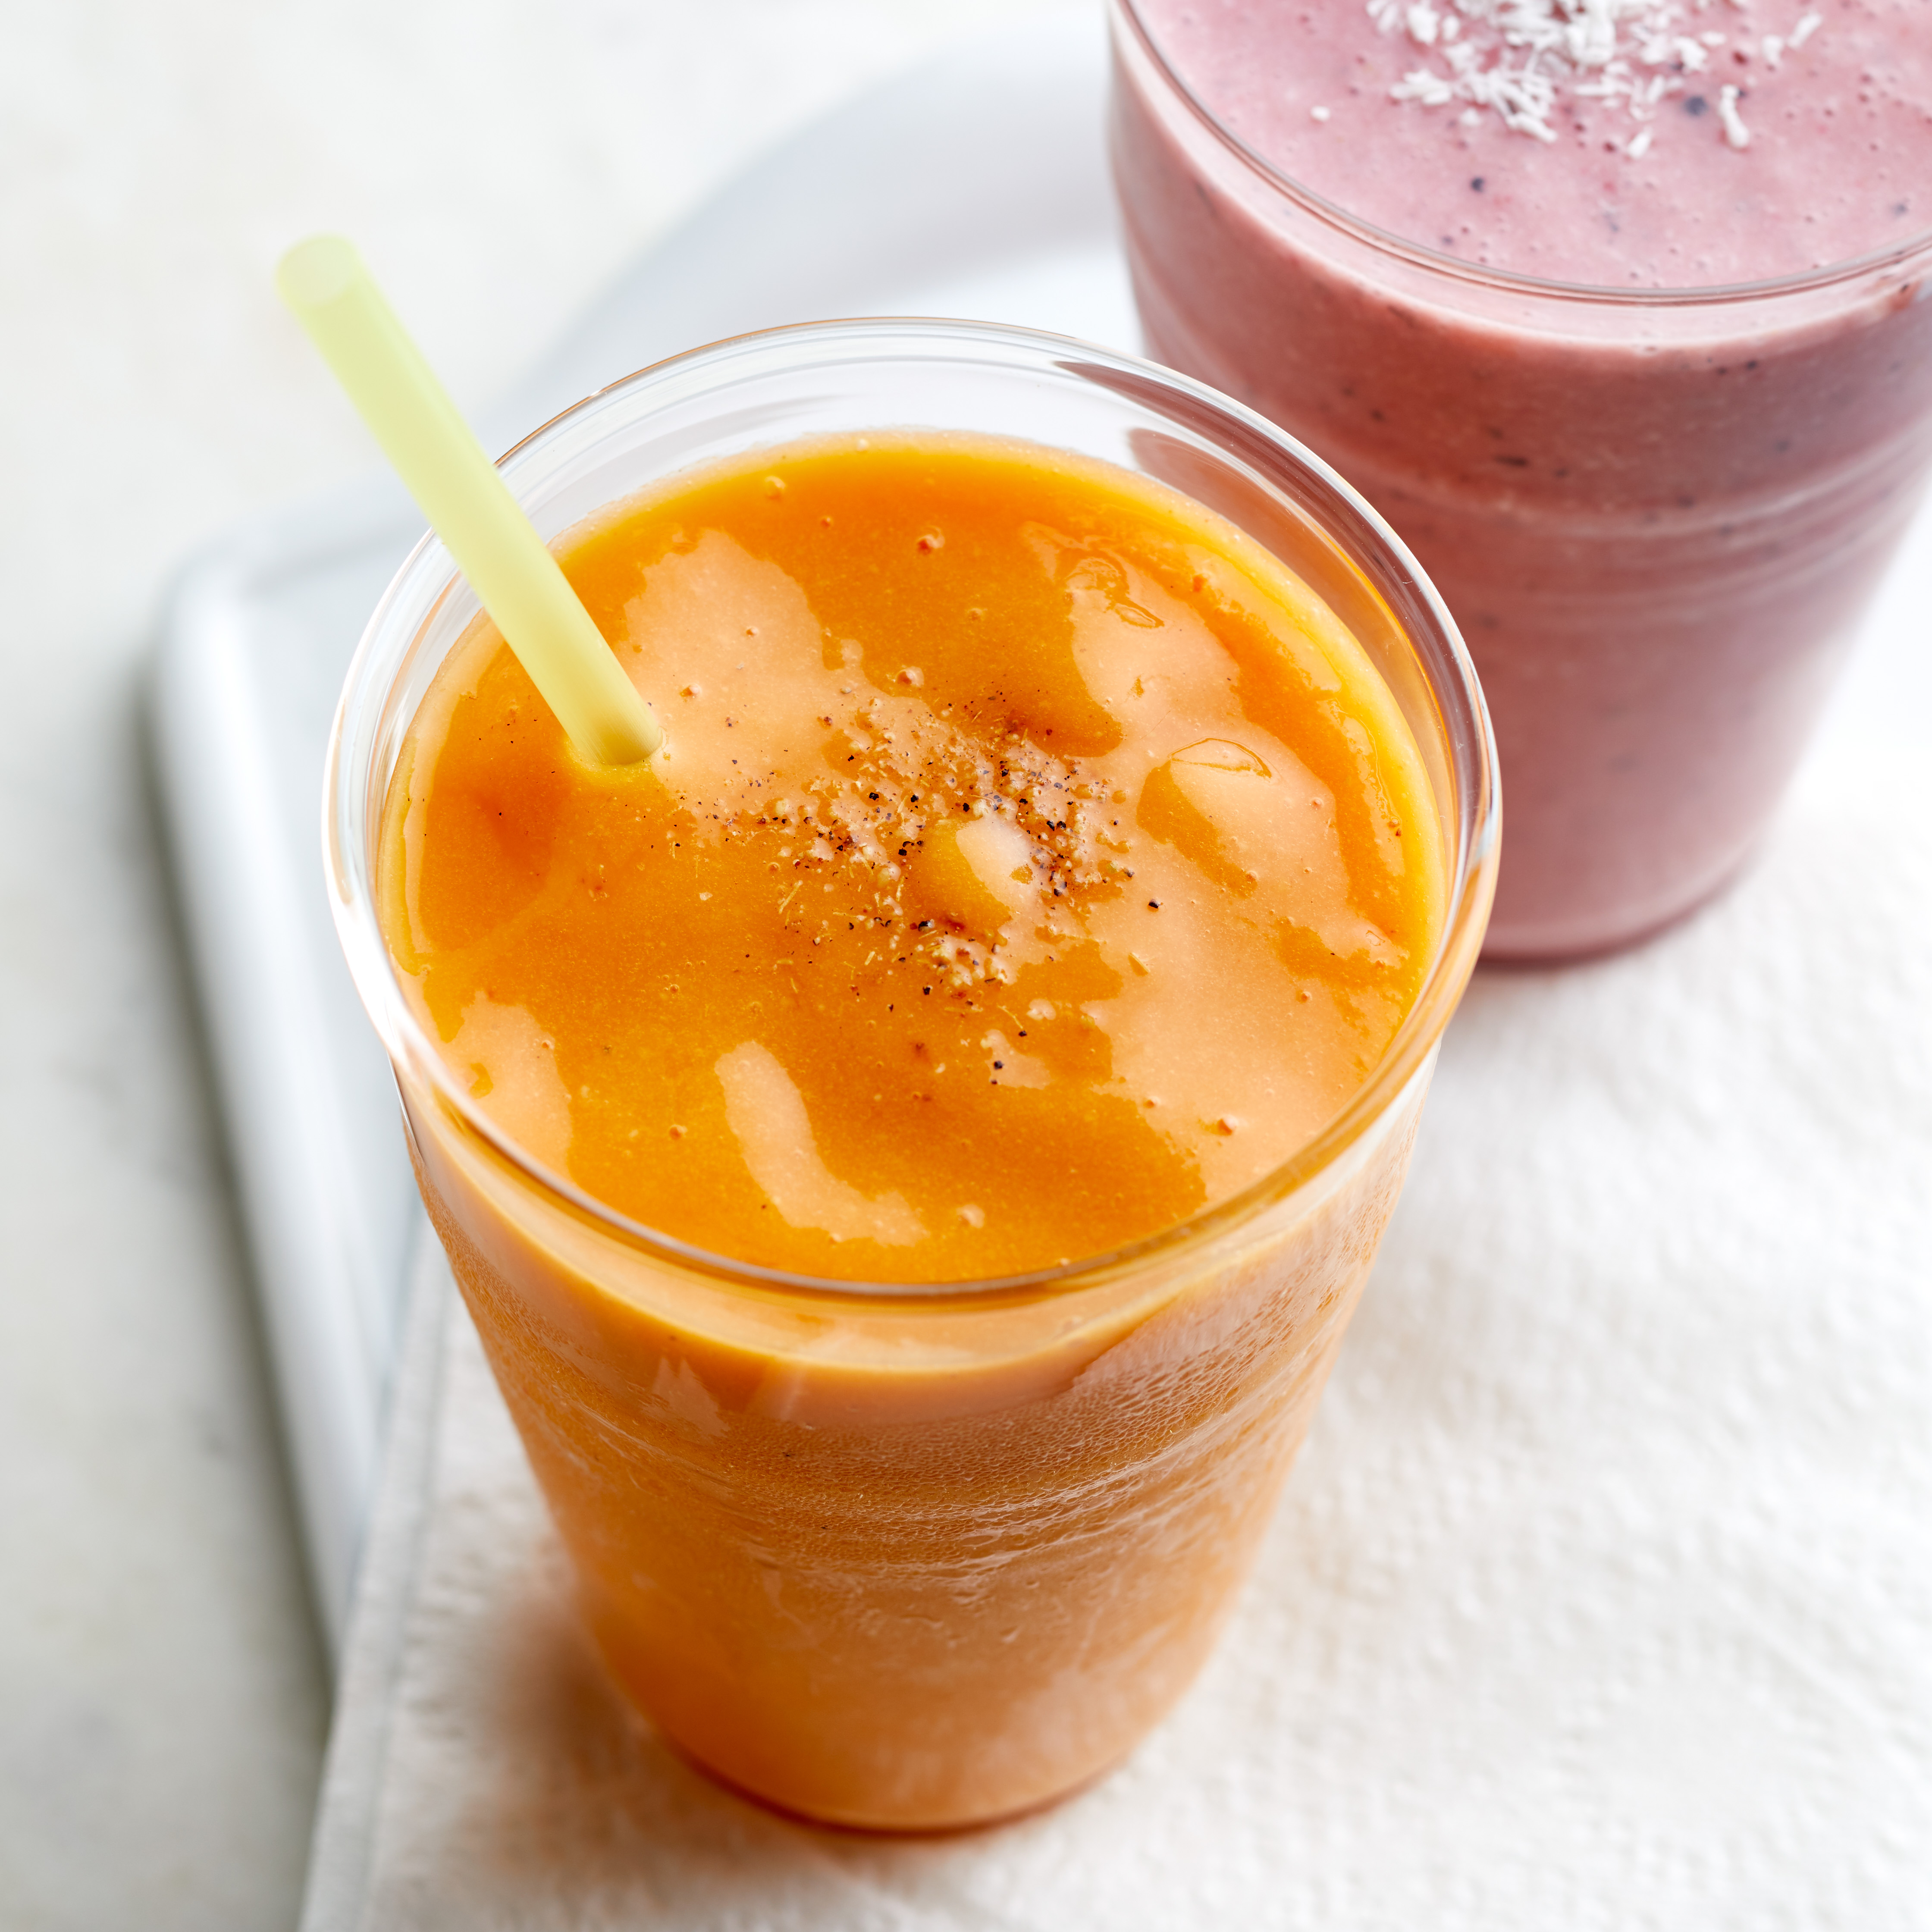 <p>Red lentils are a sneaky source of plant-based protein in this healthy smoothie recipe. The lentils add 3 grams more protein than an equal-size portion of nonfat plain yogurt and 4 grams more fiber than a typical serving of protein powder.</p>
                          